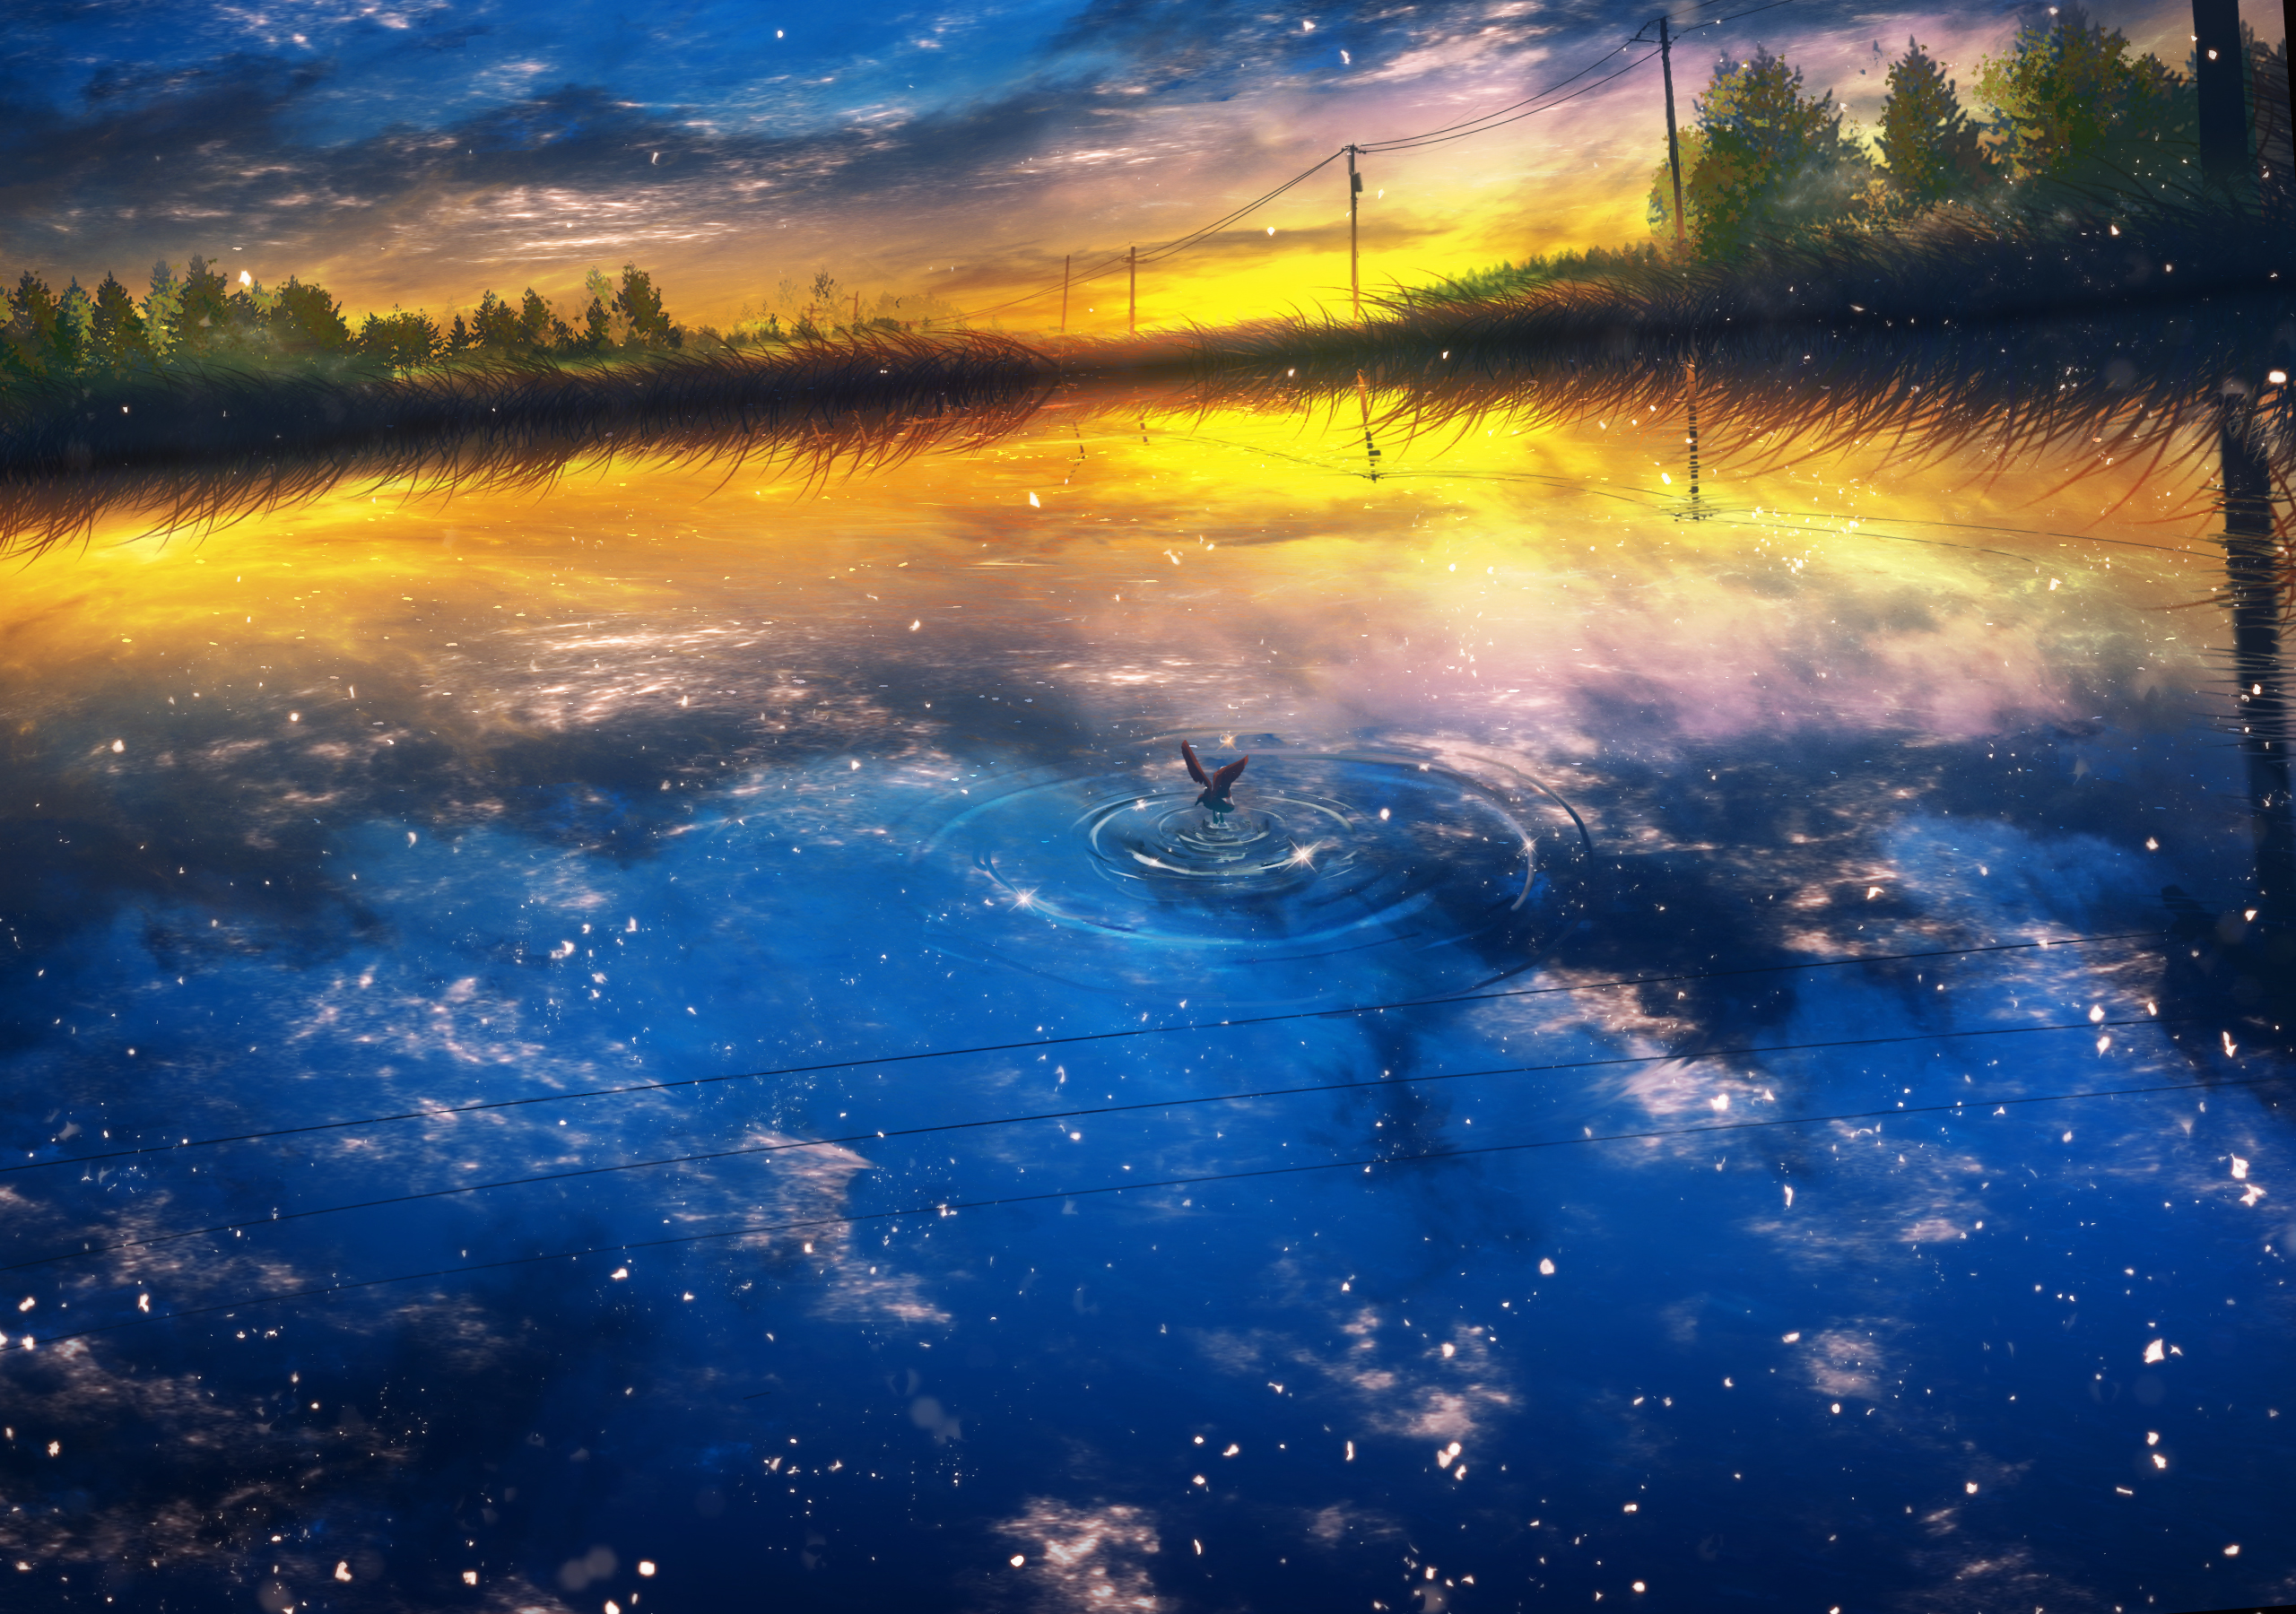 General 2560x1800 landscape lake trees stars power lines birds animals outdoors nature water